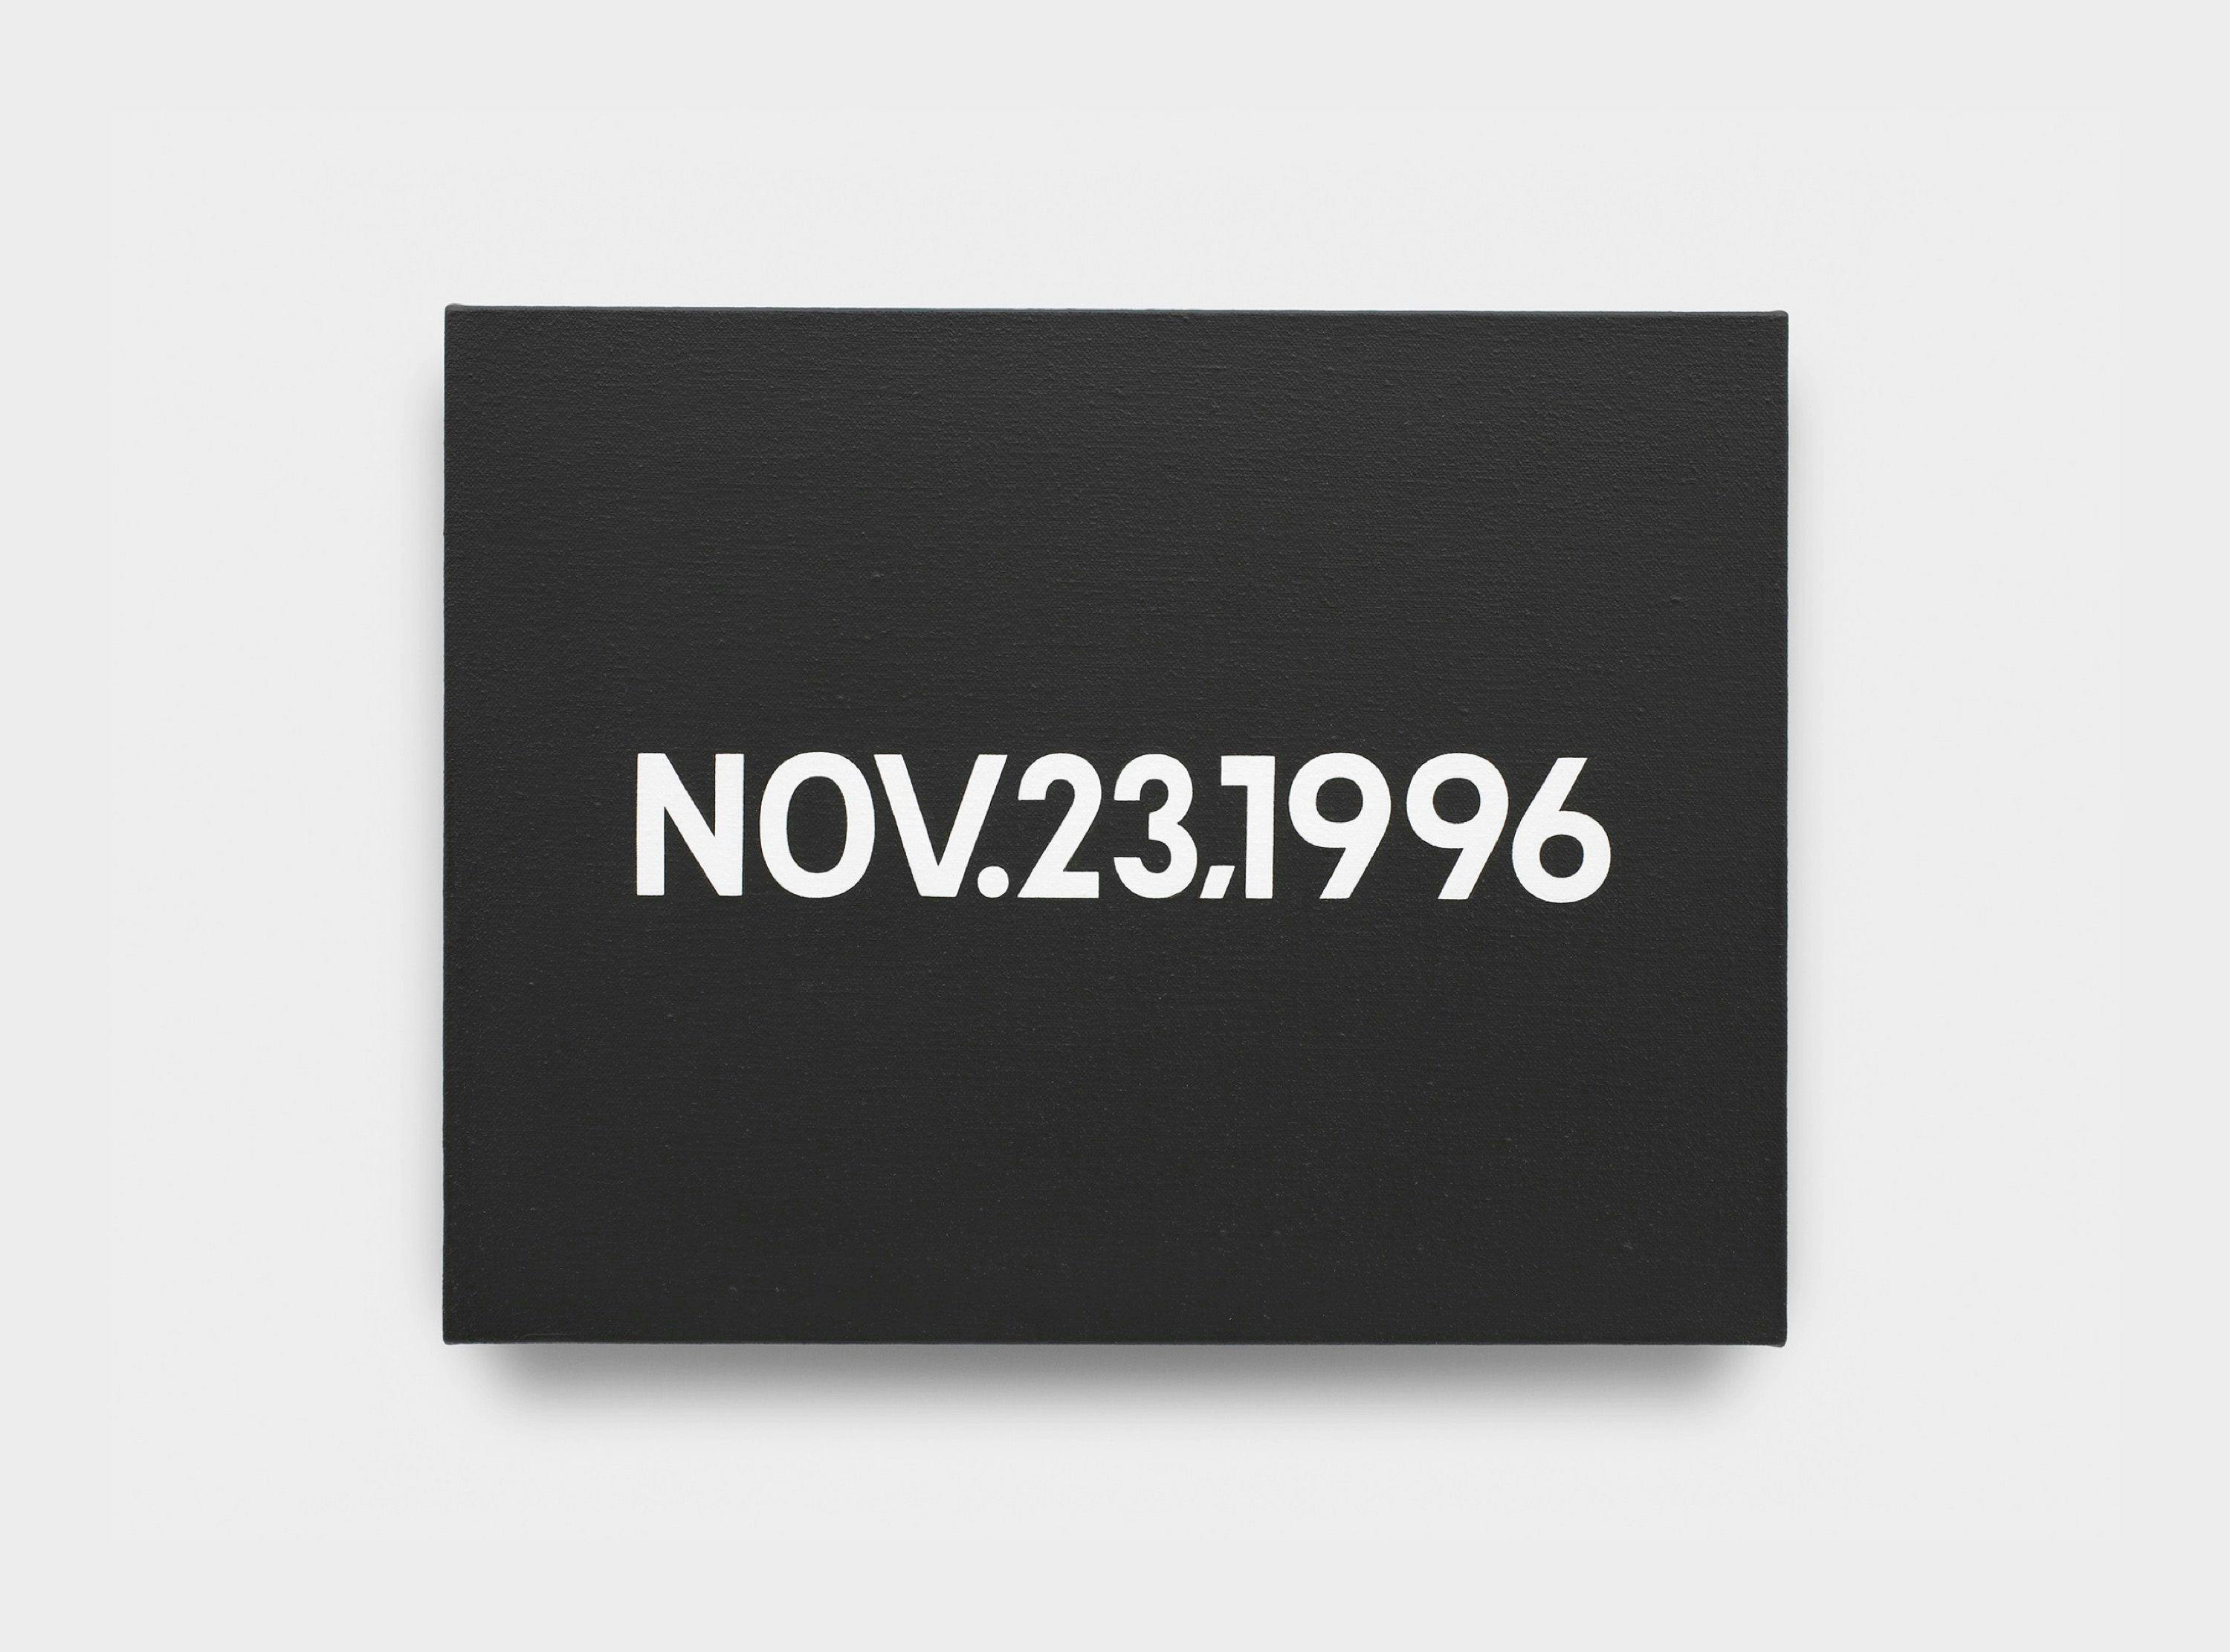 A painting by On Kawara, titled NOV. 23, 1996, dated 1964.